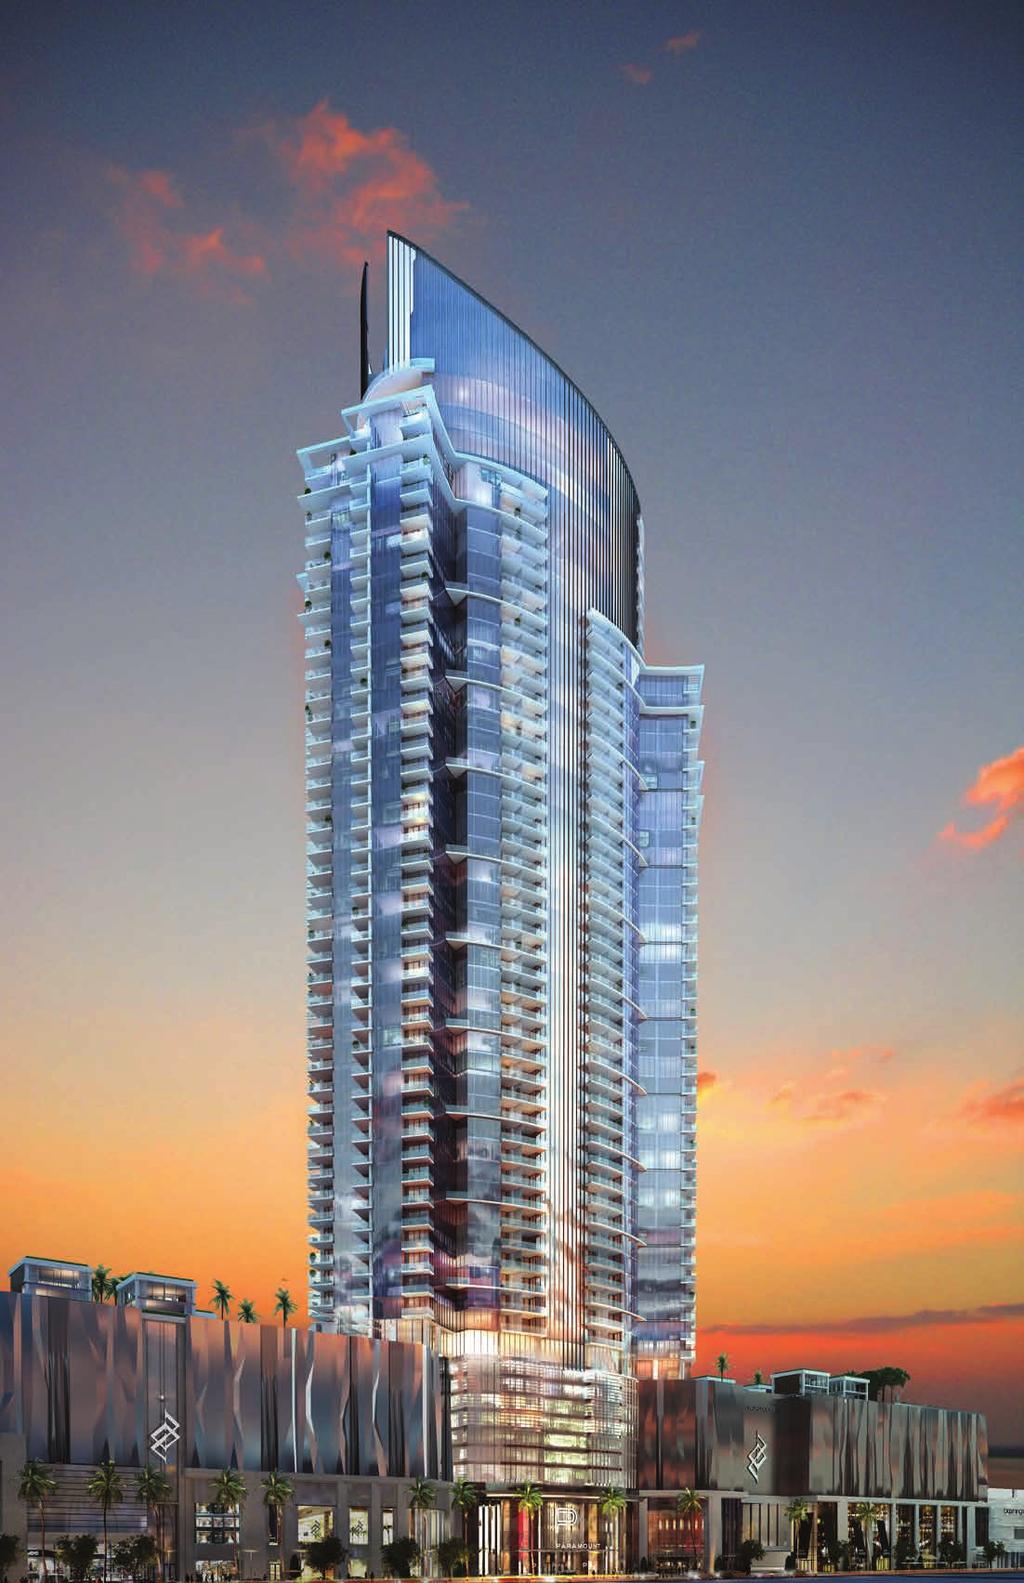 A SIGNATURE RESITIAL TOWER PARAMOUNT Miami Worldcenter, will stand 700-feet above the